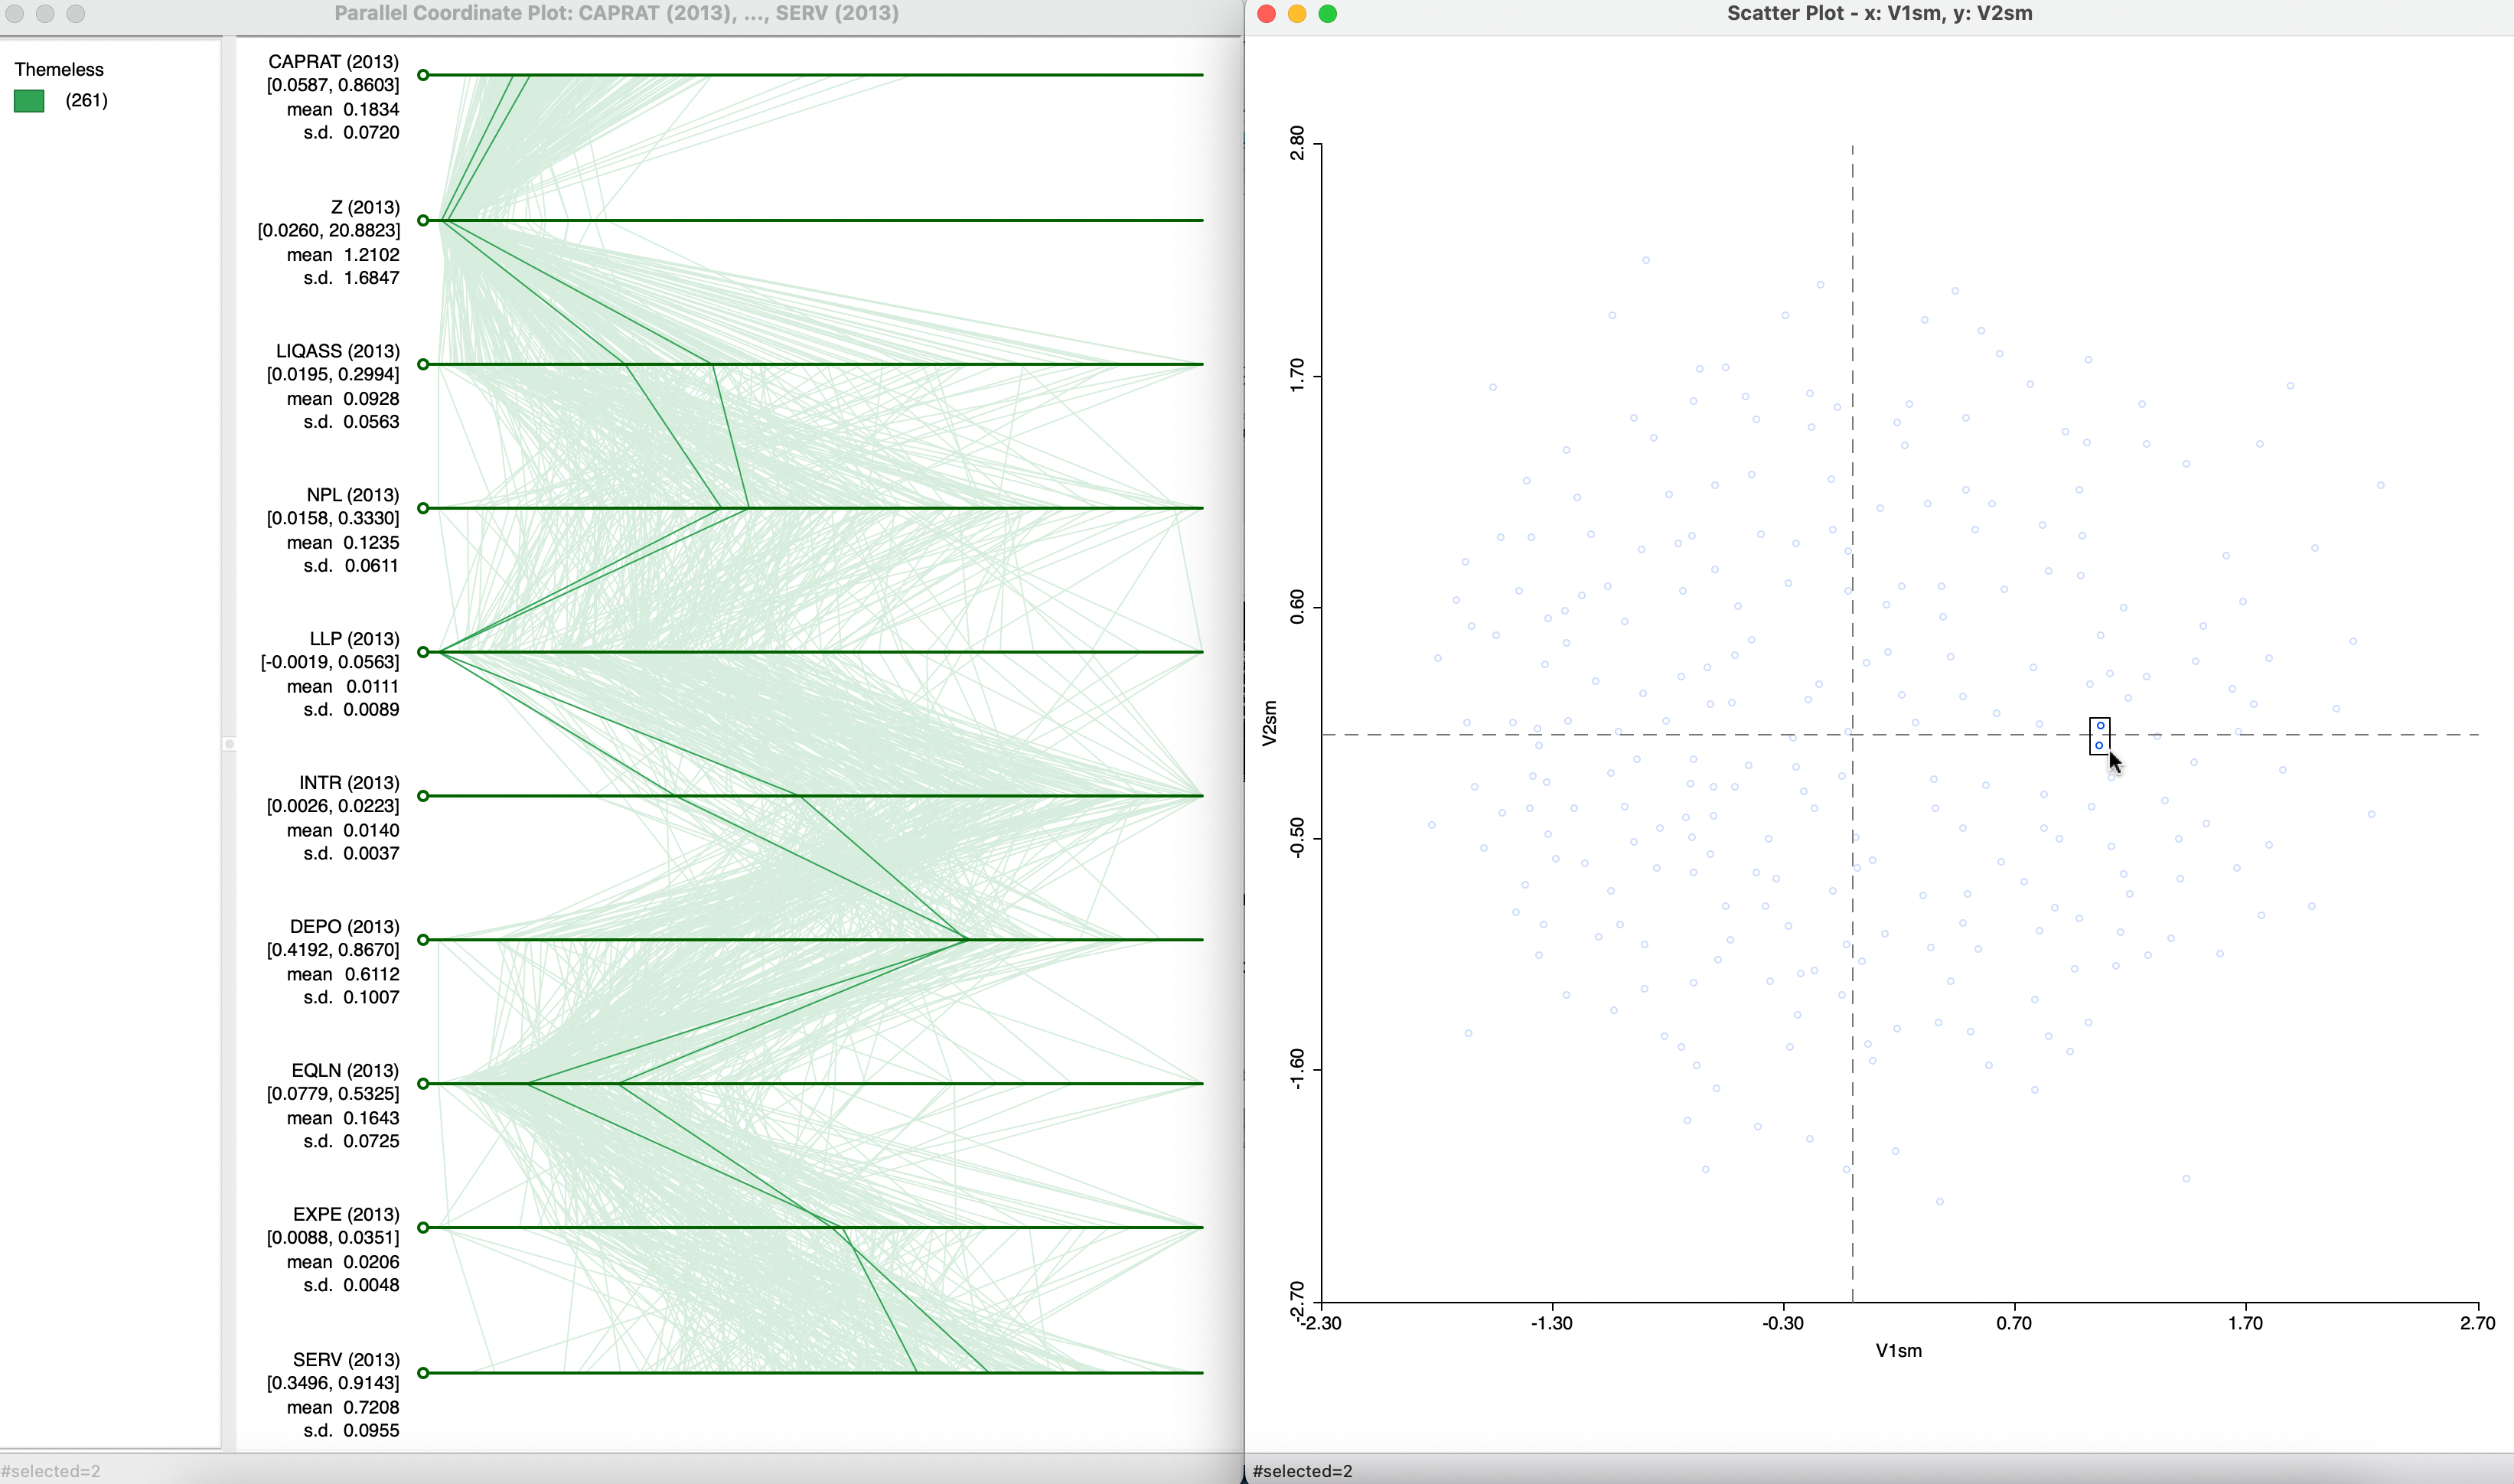 MDS and Parallel Coordinate Plot